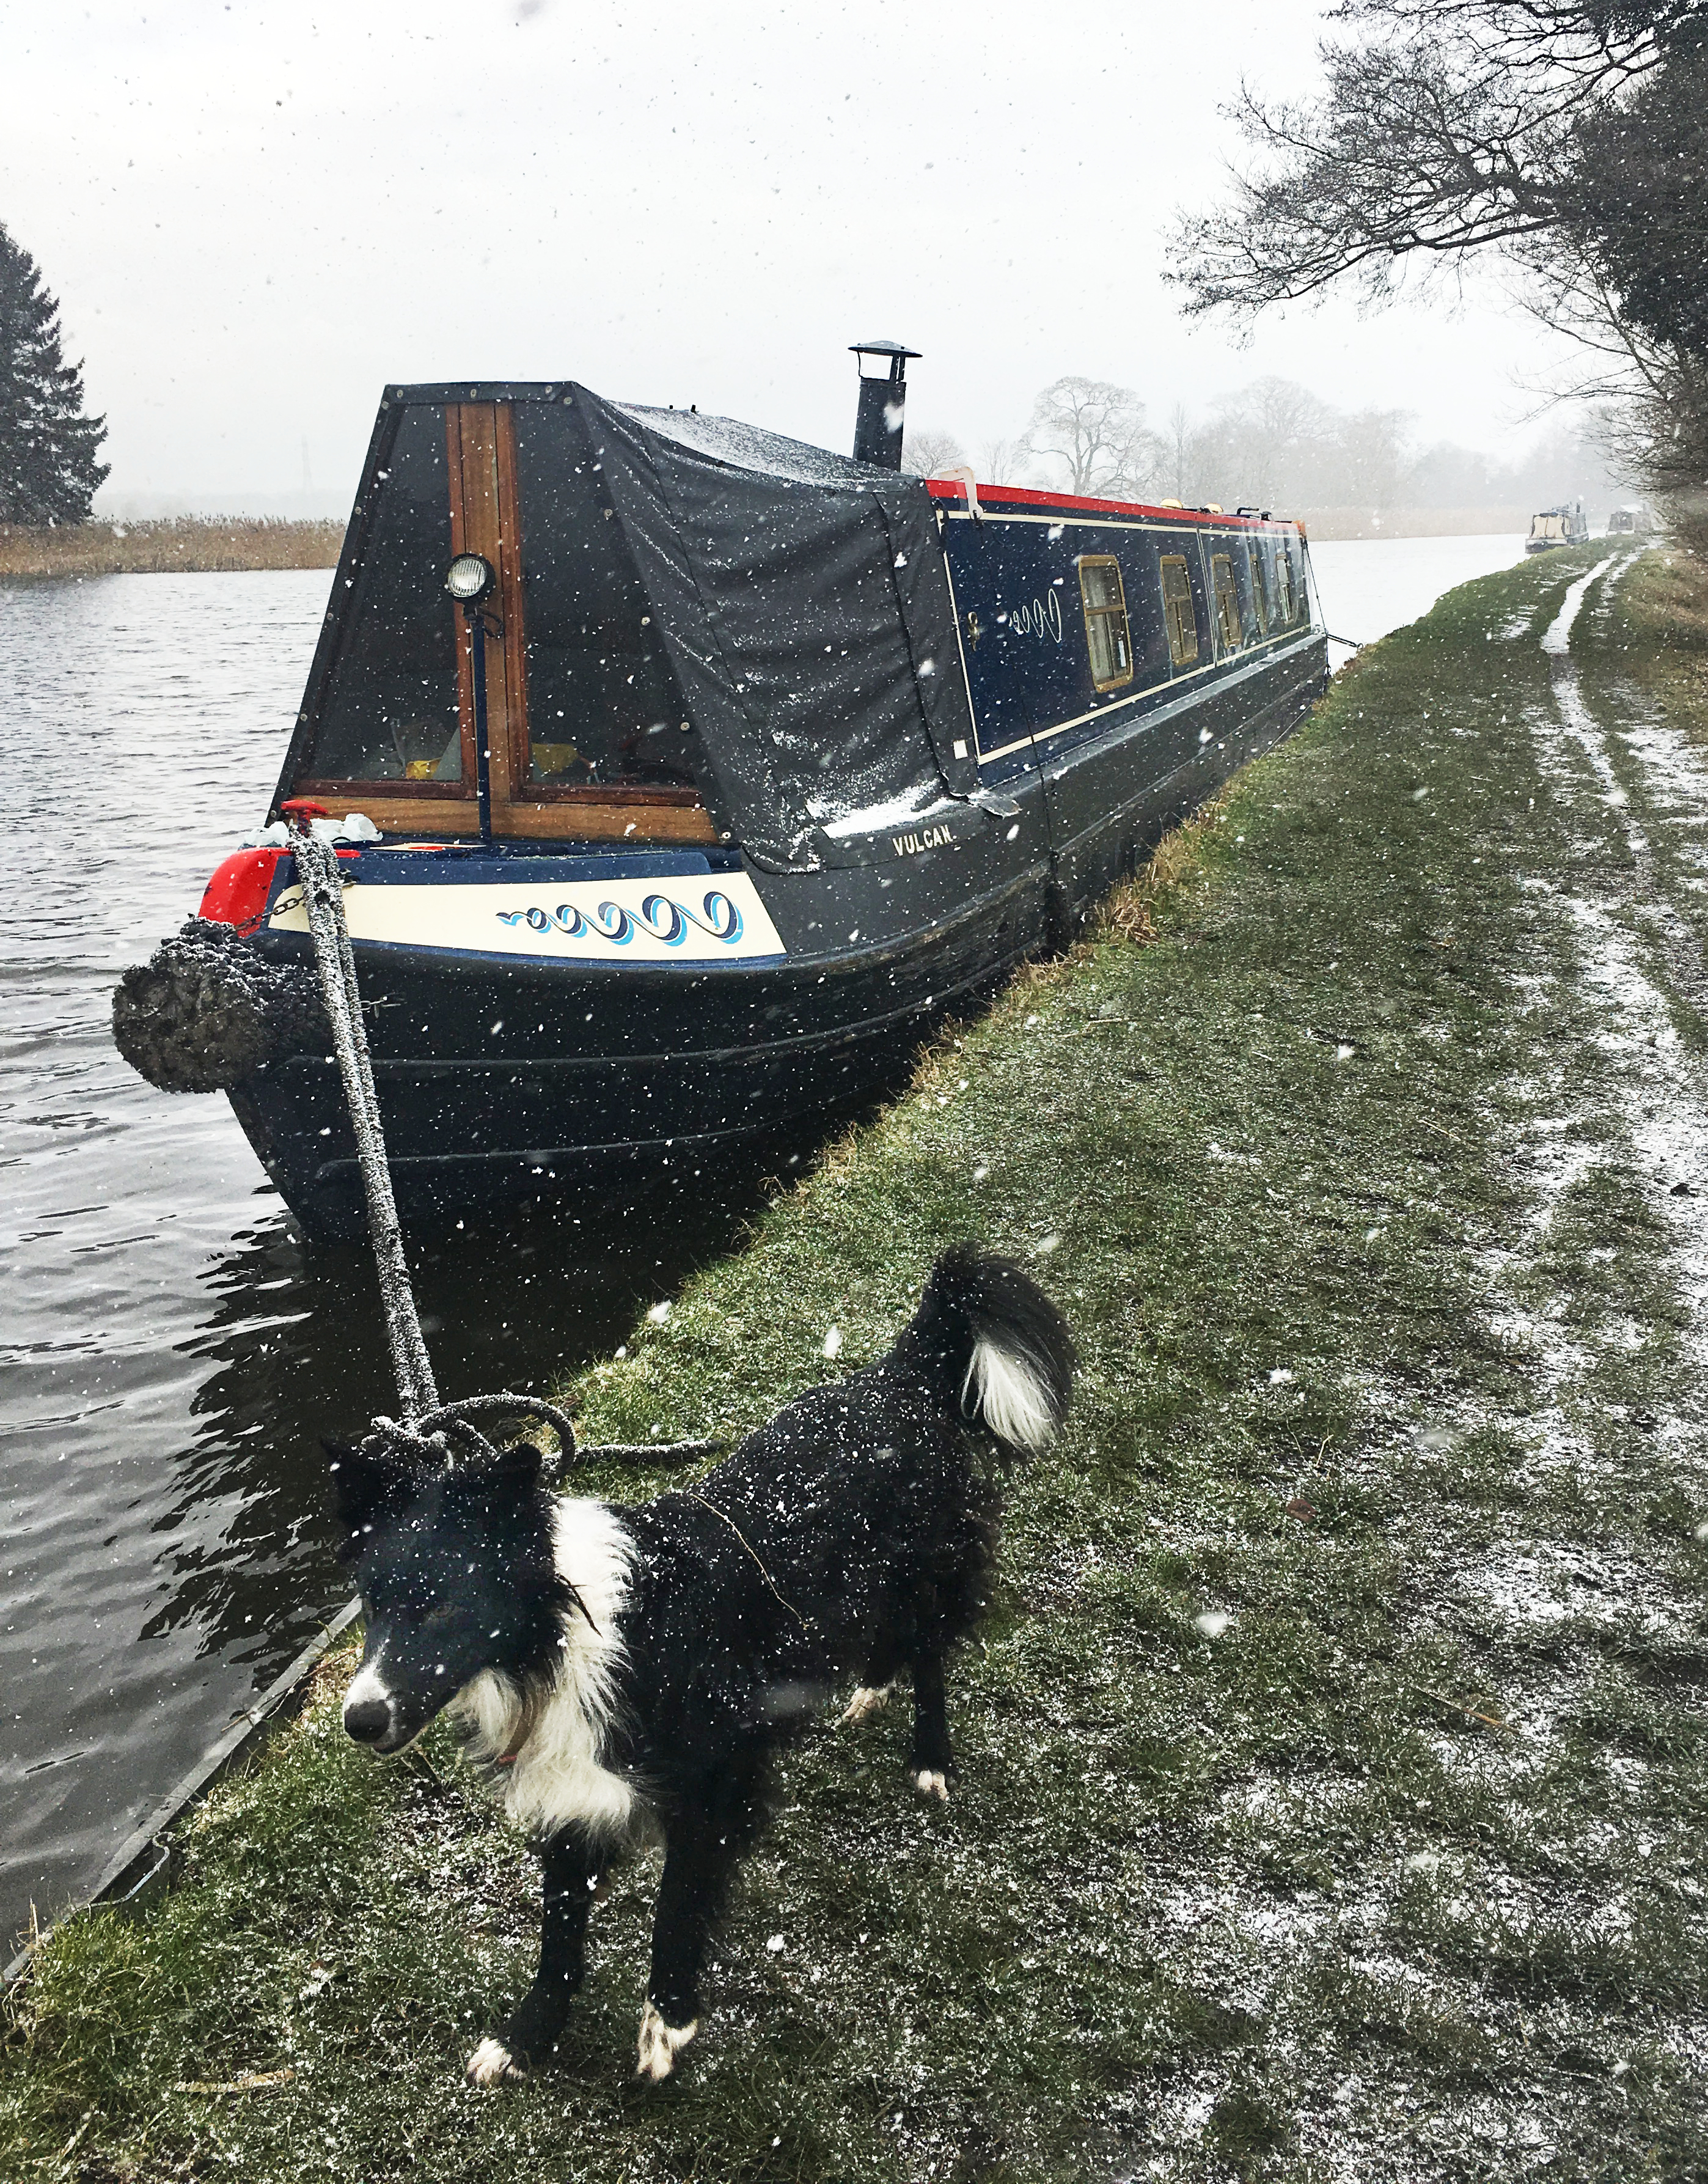 A photograph of a border collie on the towpath, enjoying the snowy conditions next to Vulcan.